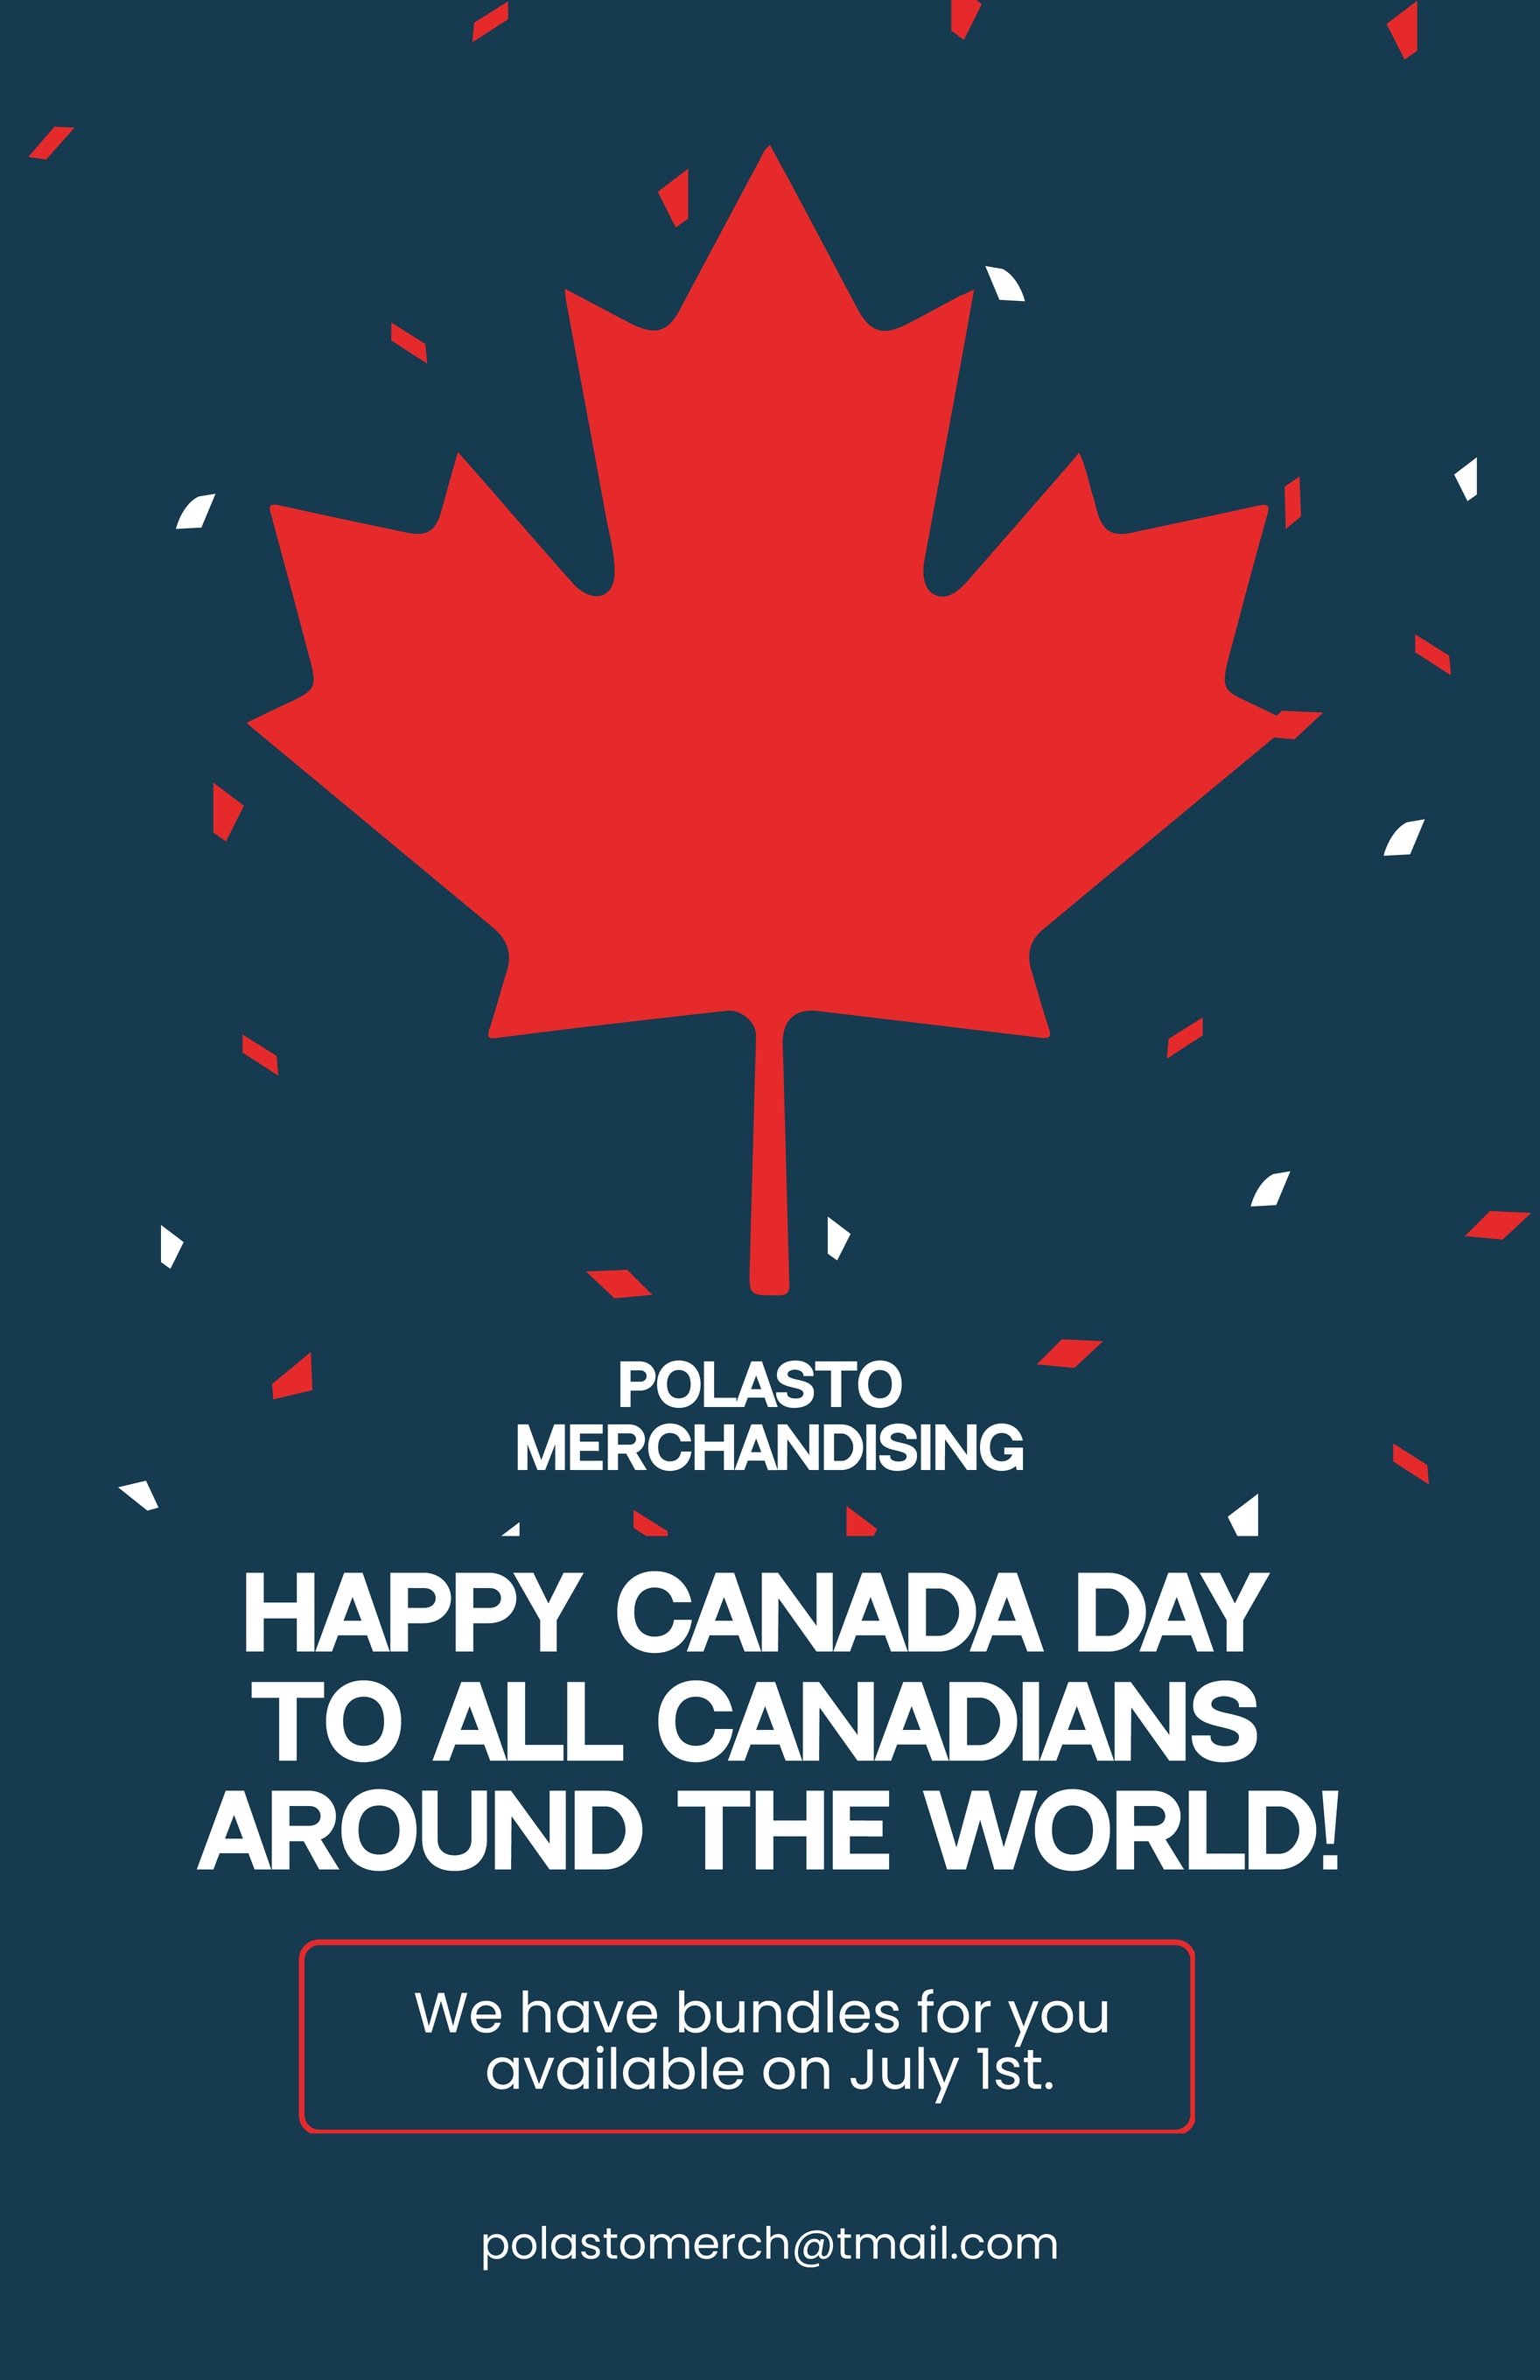 Free Canada Day Ad Poster Template in Word, Google Docs, Illustrator, PSD, Publisher